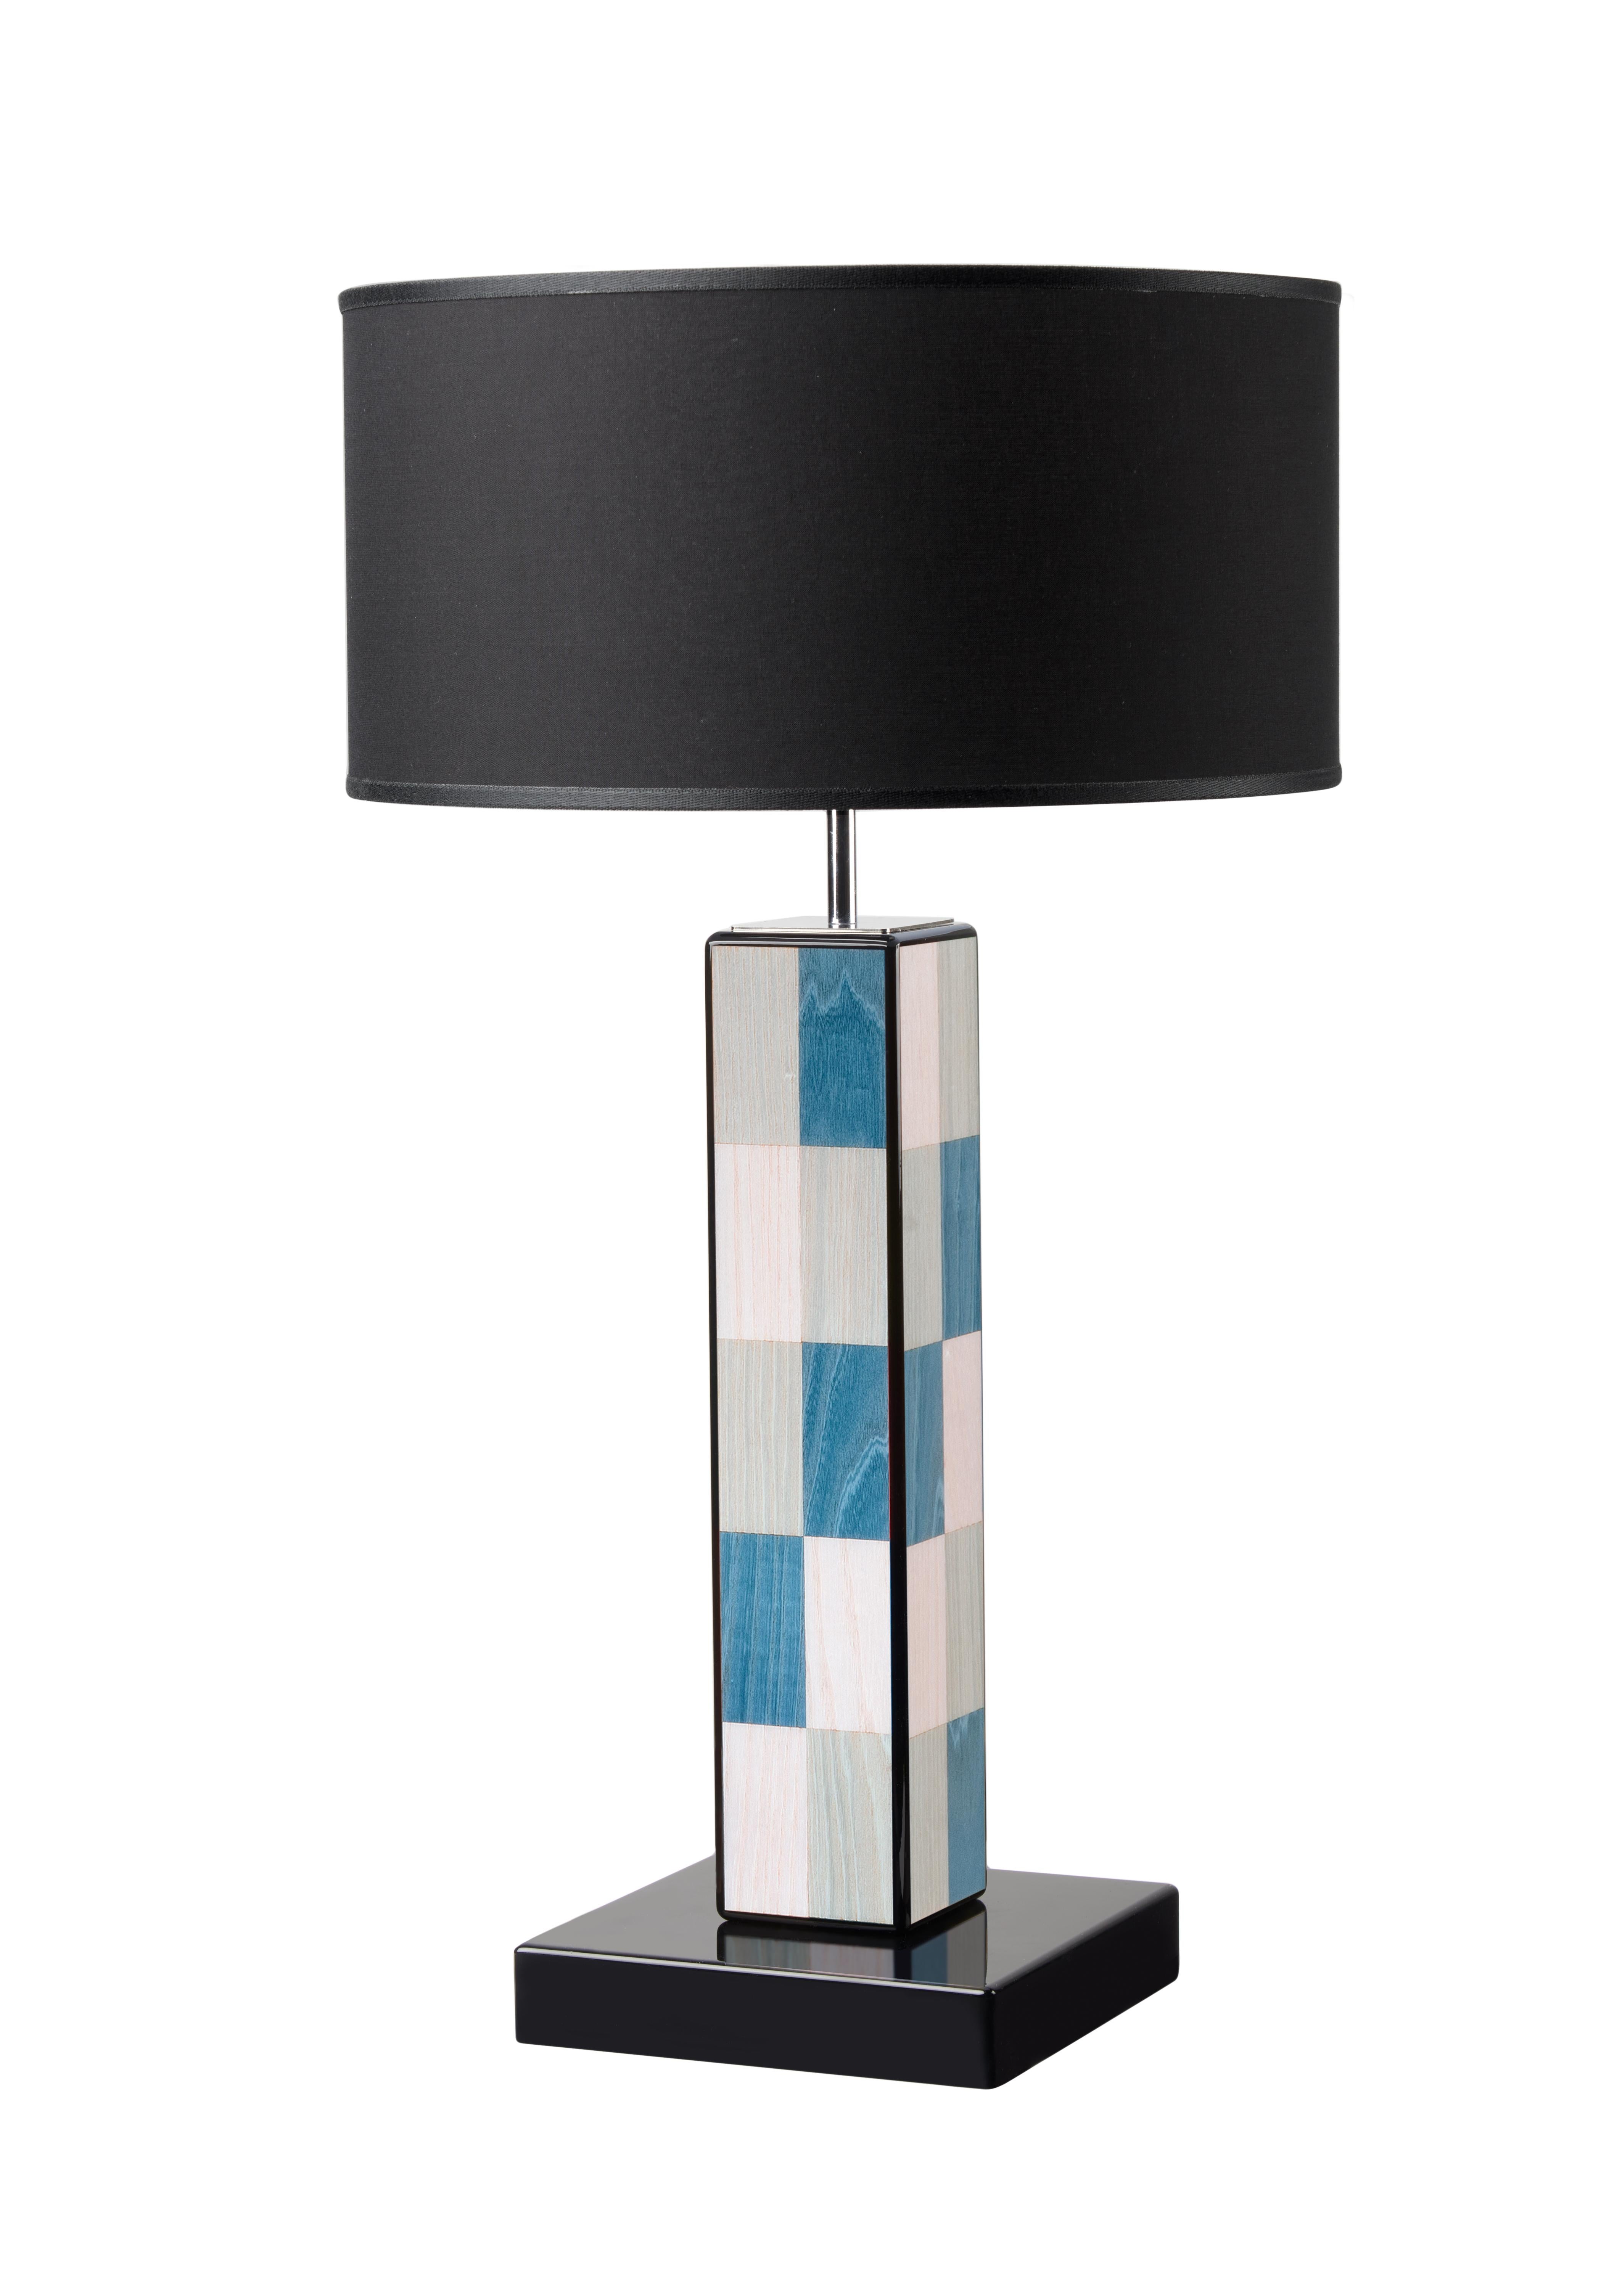 Part of the Venezia Laguna series of designs inspired by the namesake historic sestiere of Venice, this table lamp will make for a timeless addition to a contemporary-style interior. Boasting a handmade inlay work painted by hand in a vivacious,